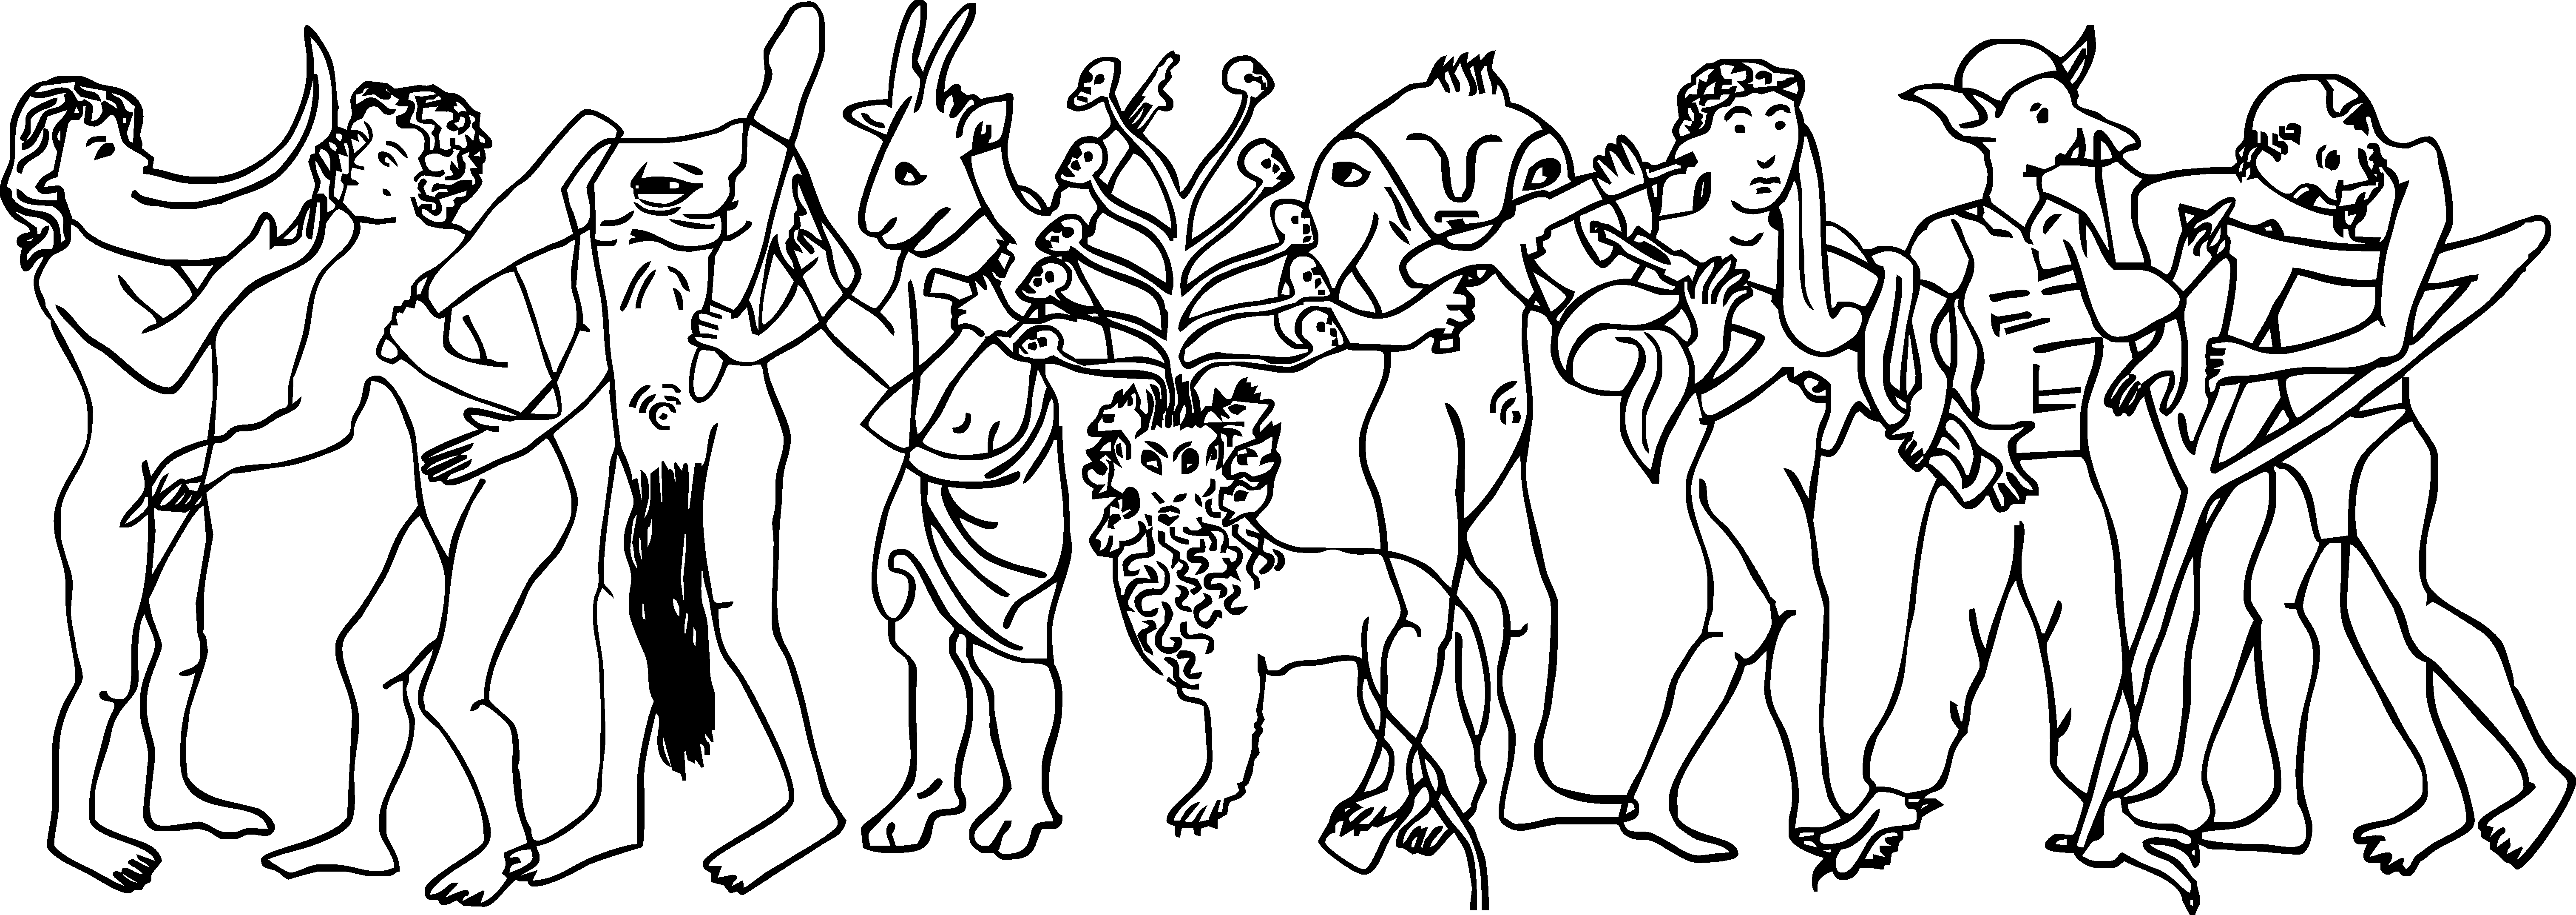 Black and white illustration depicting humanoid figures holding automatic weapons. The figures are based on drawings of bestiaries first dating from 1000 AD.